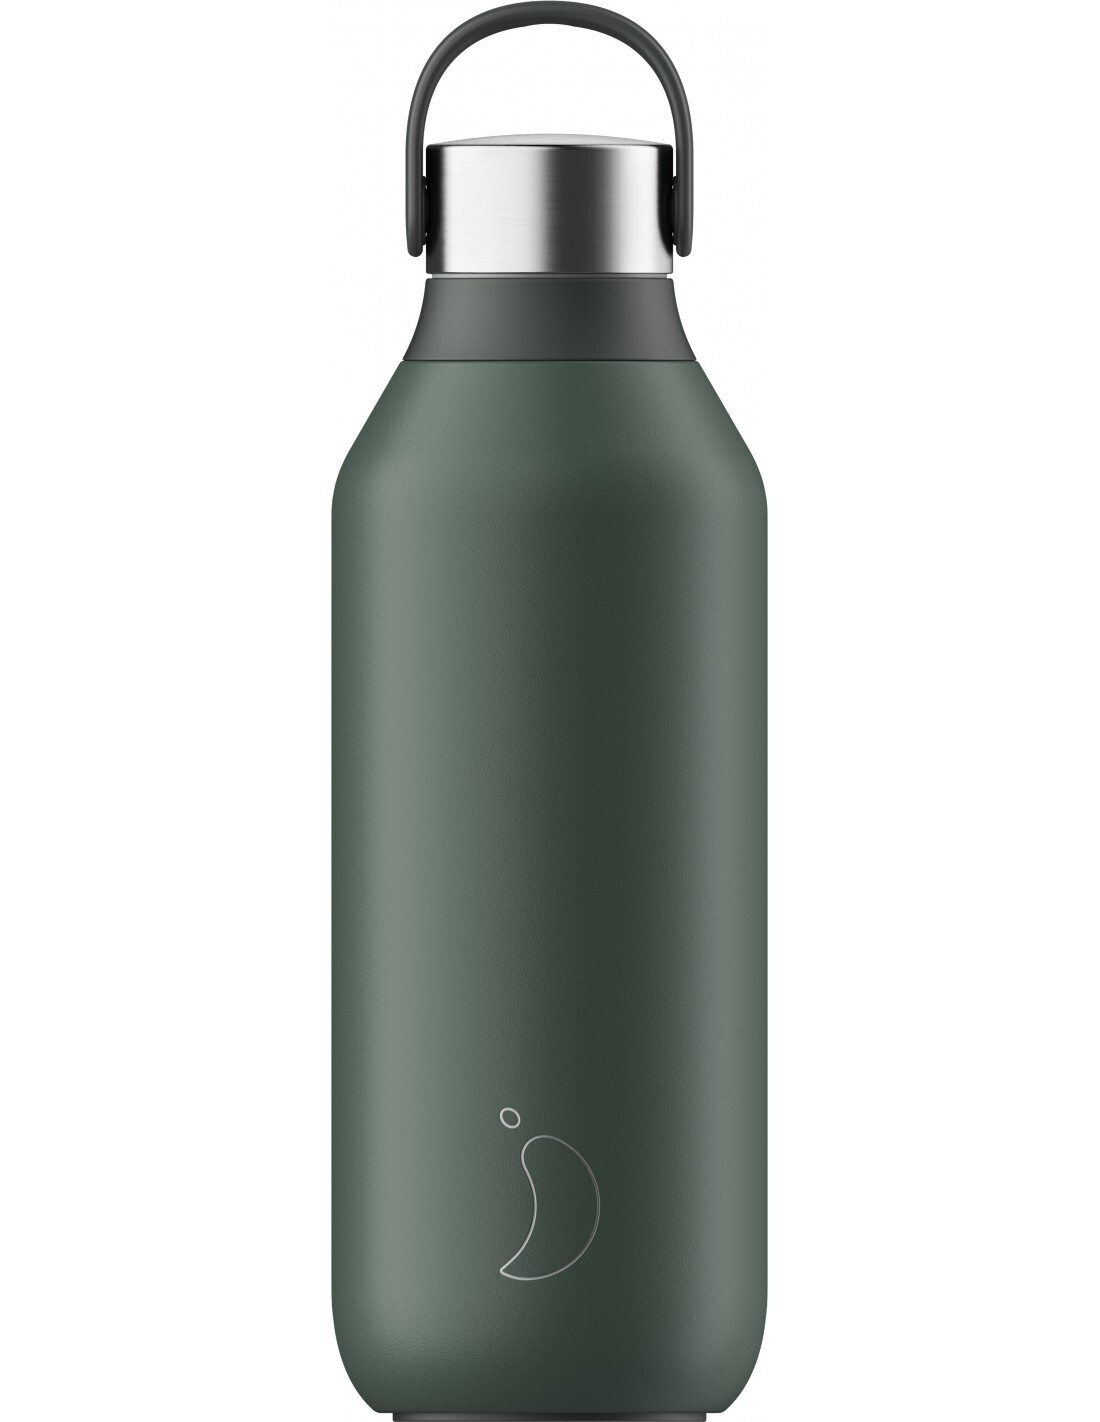 Chilly's Series 2 Bottle Pine Green 500ml